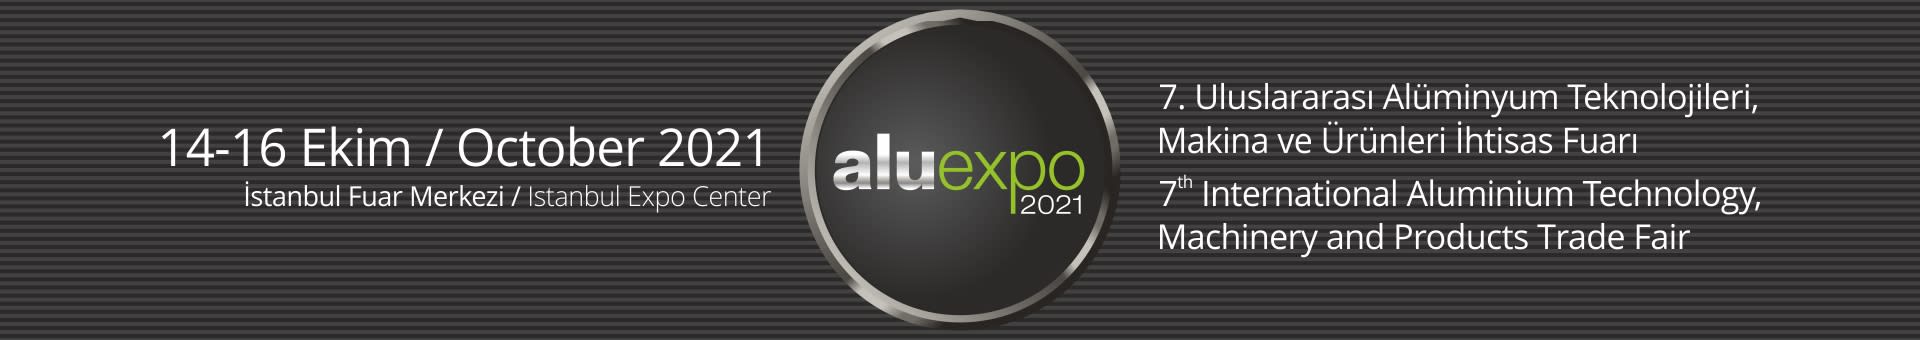 WE TAKE OUR PLACE IN ALUEXPO 2021